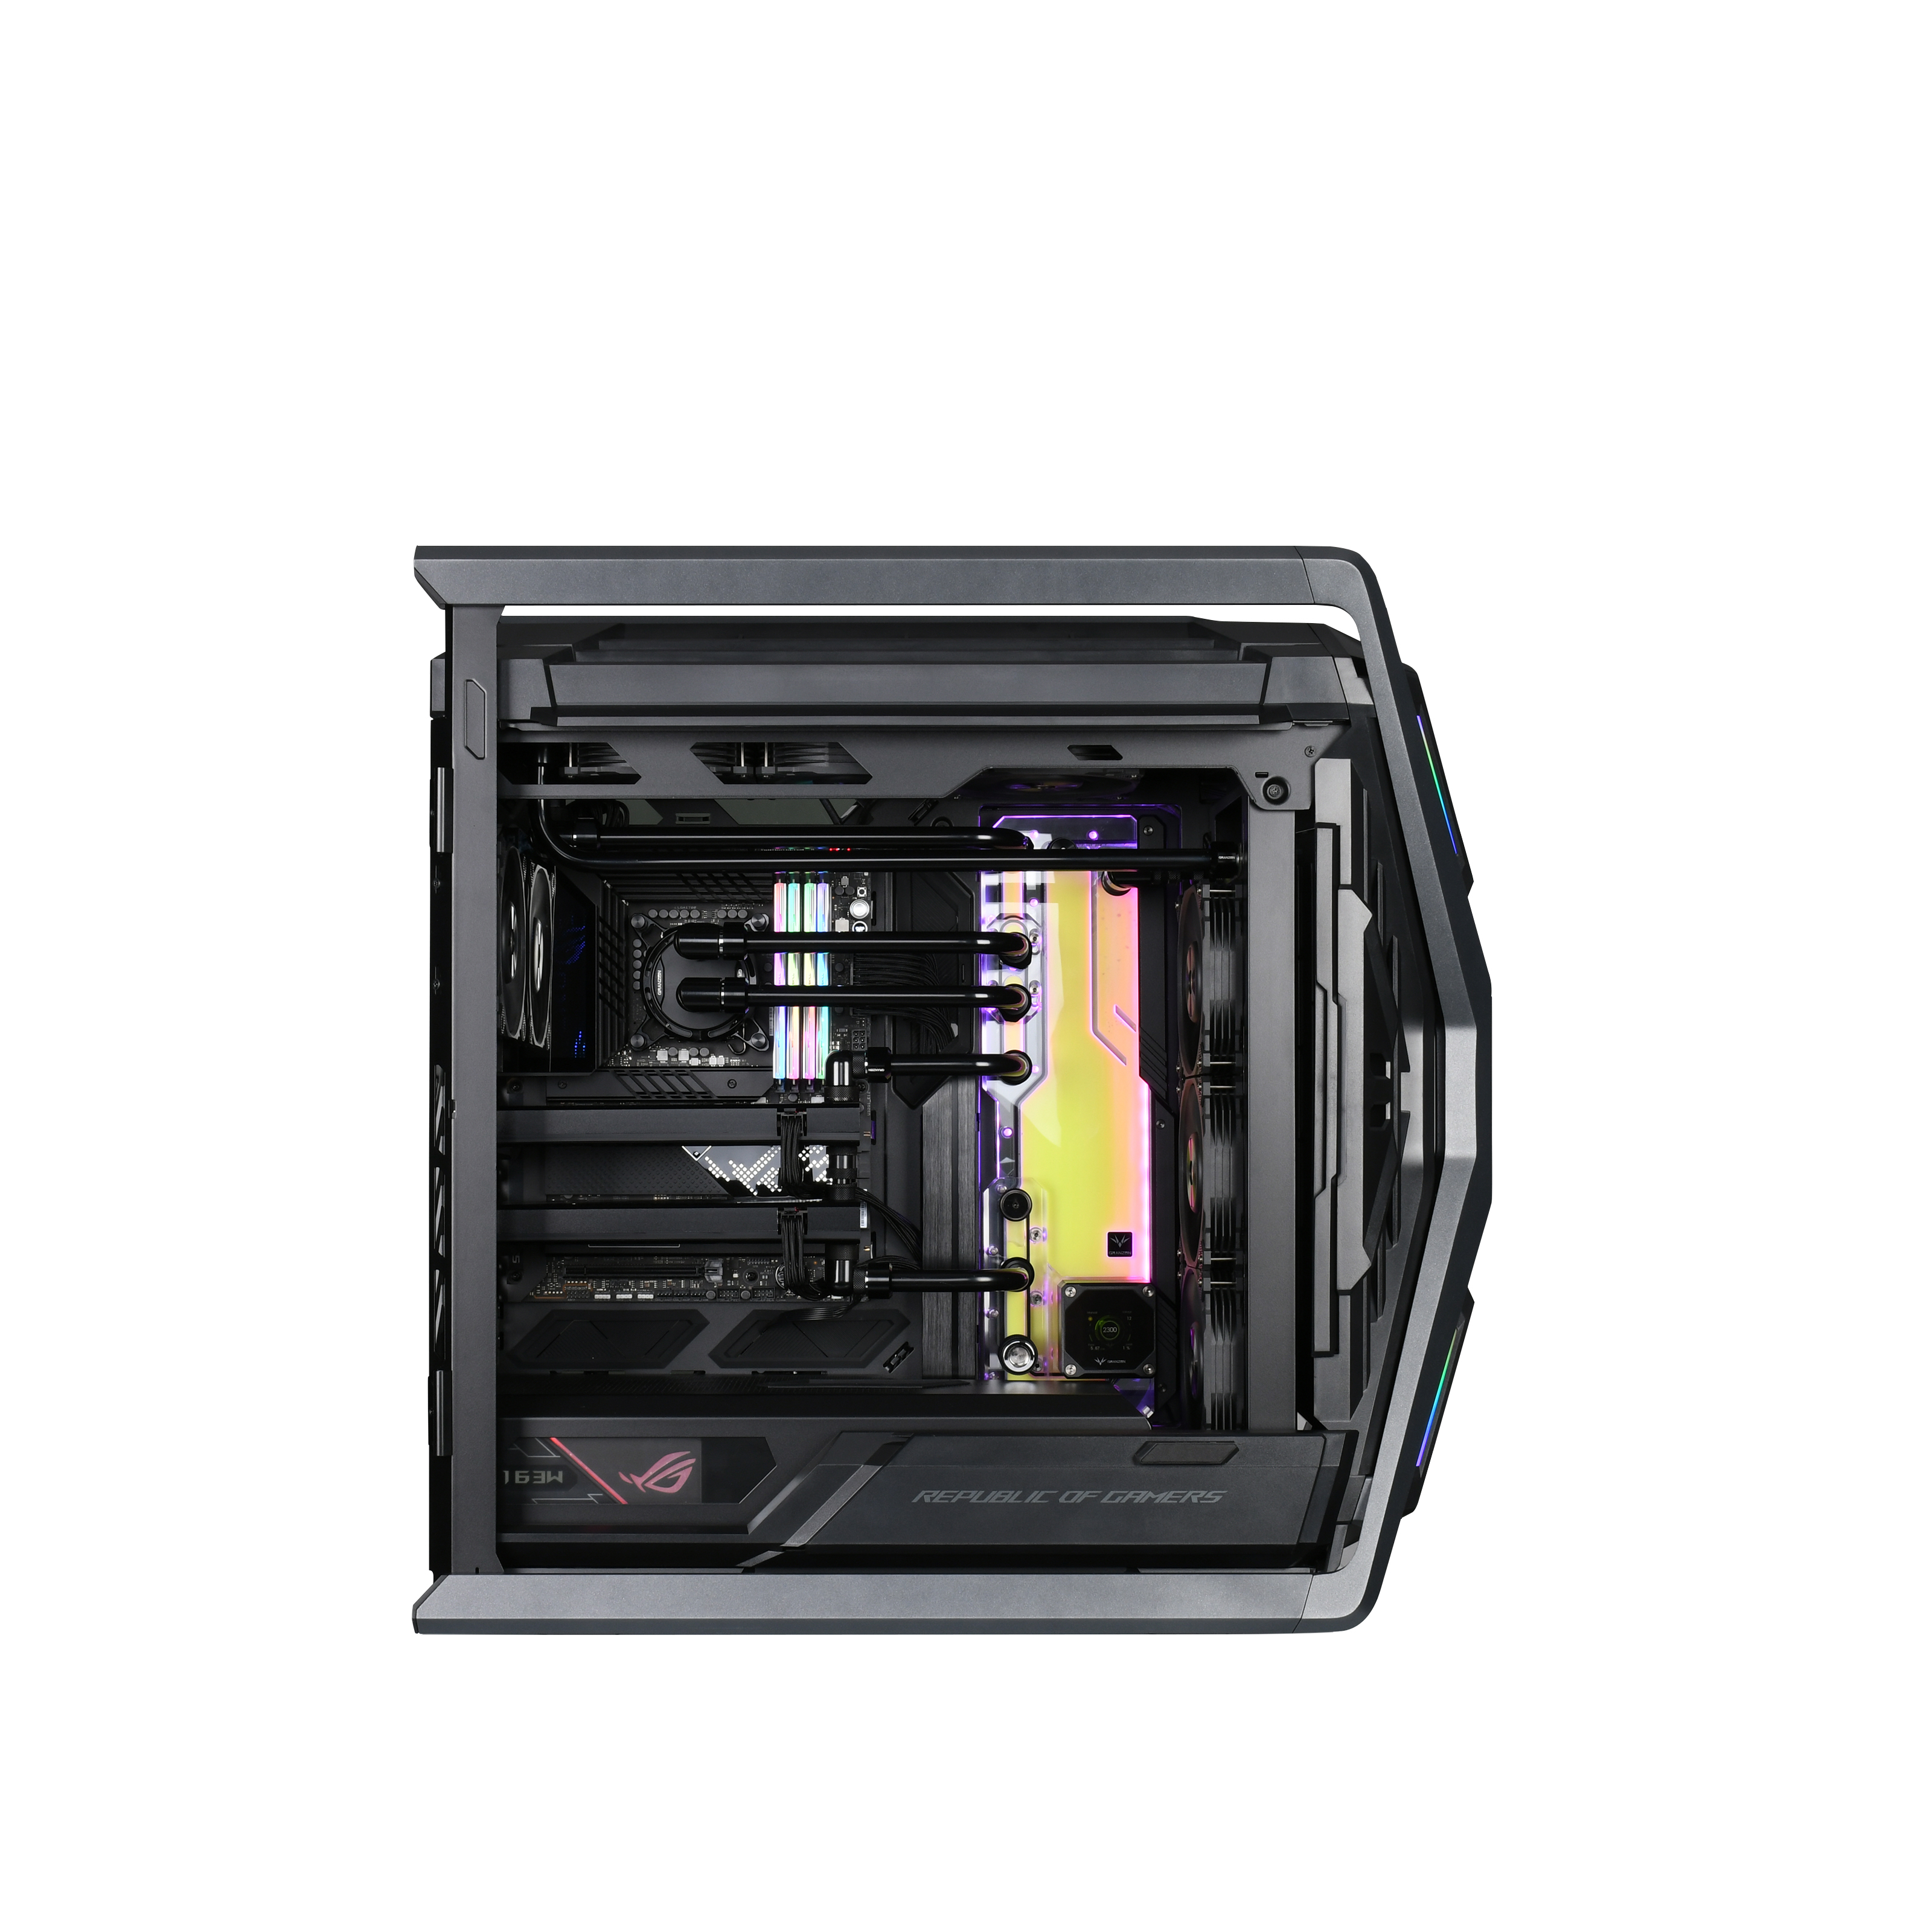 ASUS ROG Hyperion: Ultimate Custom Water-Cooled Gaming PC with